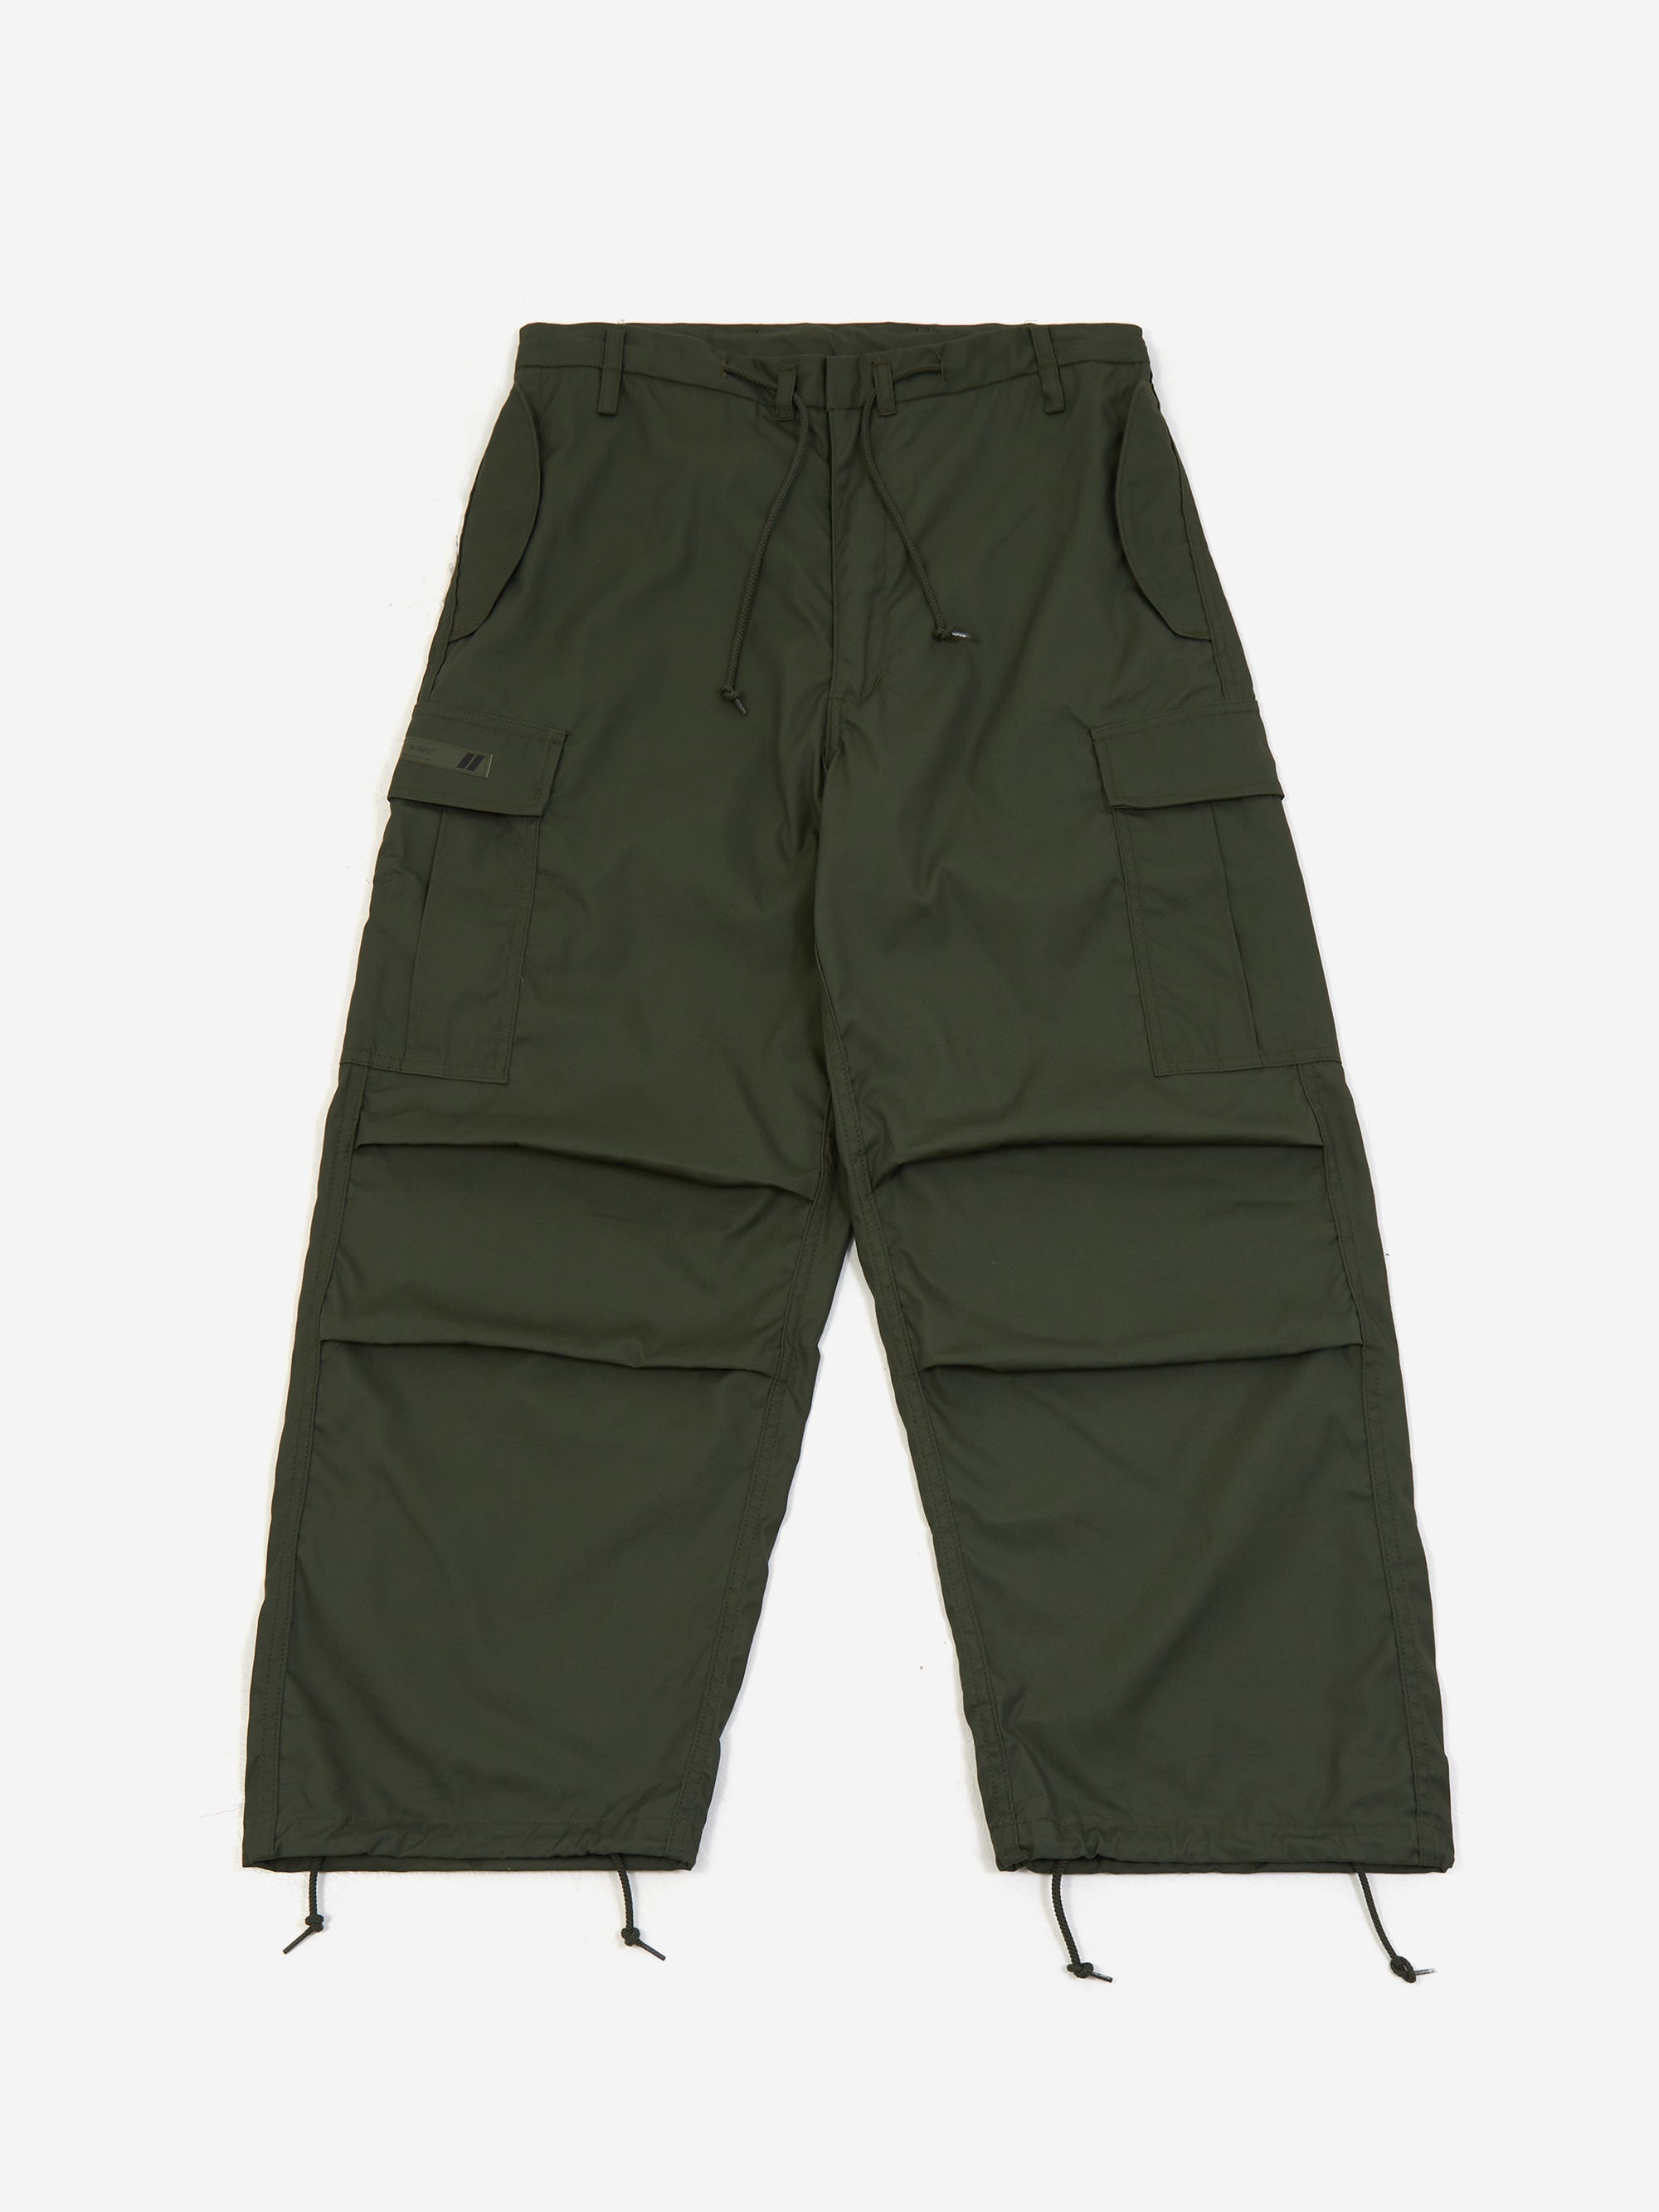 WTAPS MILT0001 / Trousers 14 / NYCO. Oxford - Olive Drab